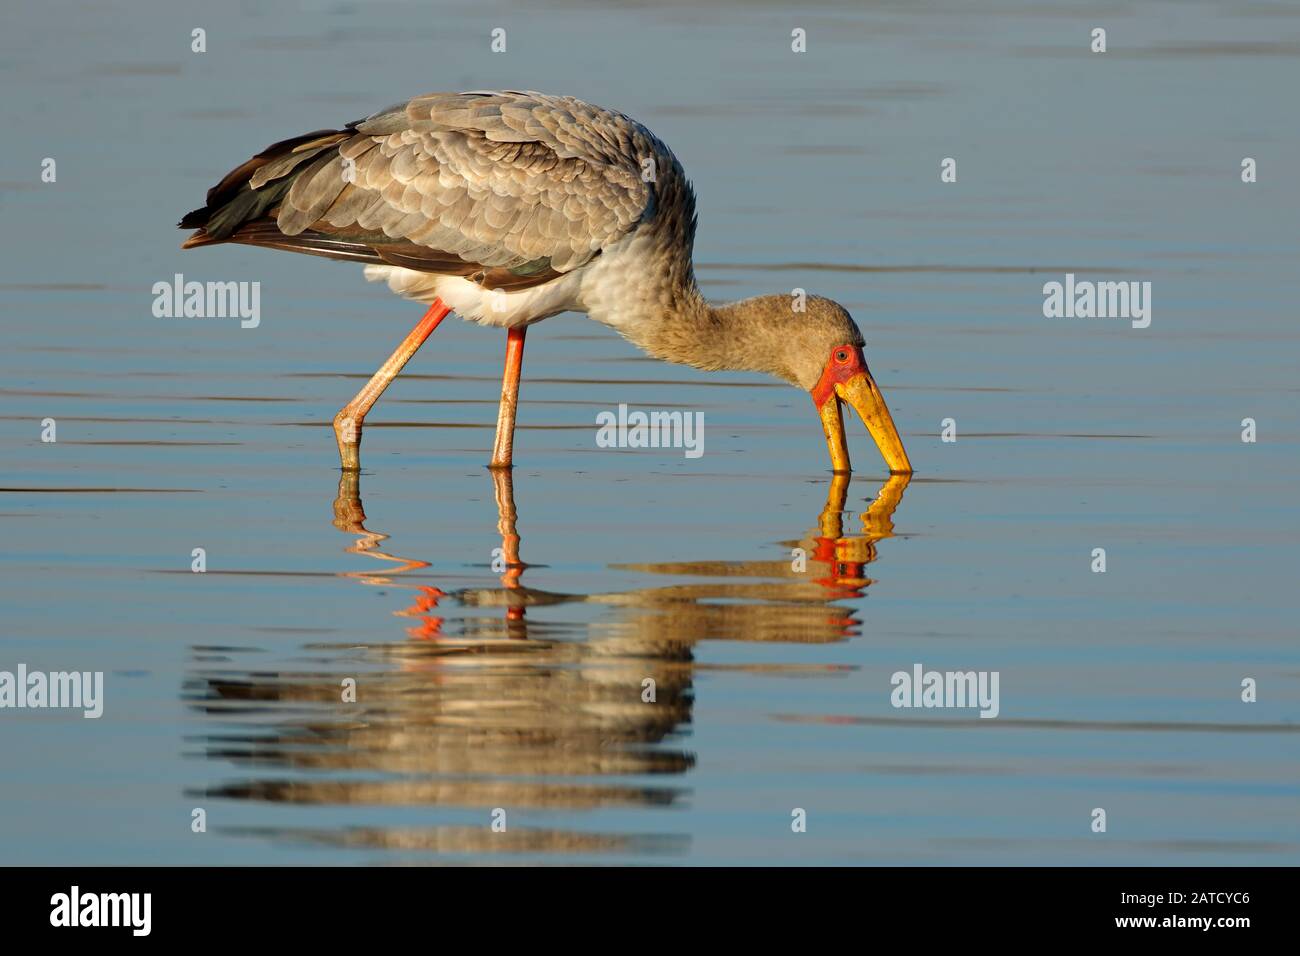 Yellow-billed stork (Mycteria ibis) foraging in shallow water, Kruger National Park, South Africa Stock Photo